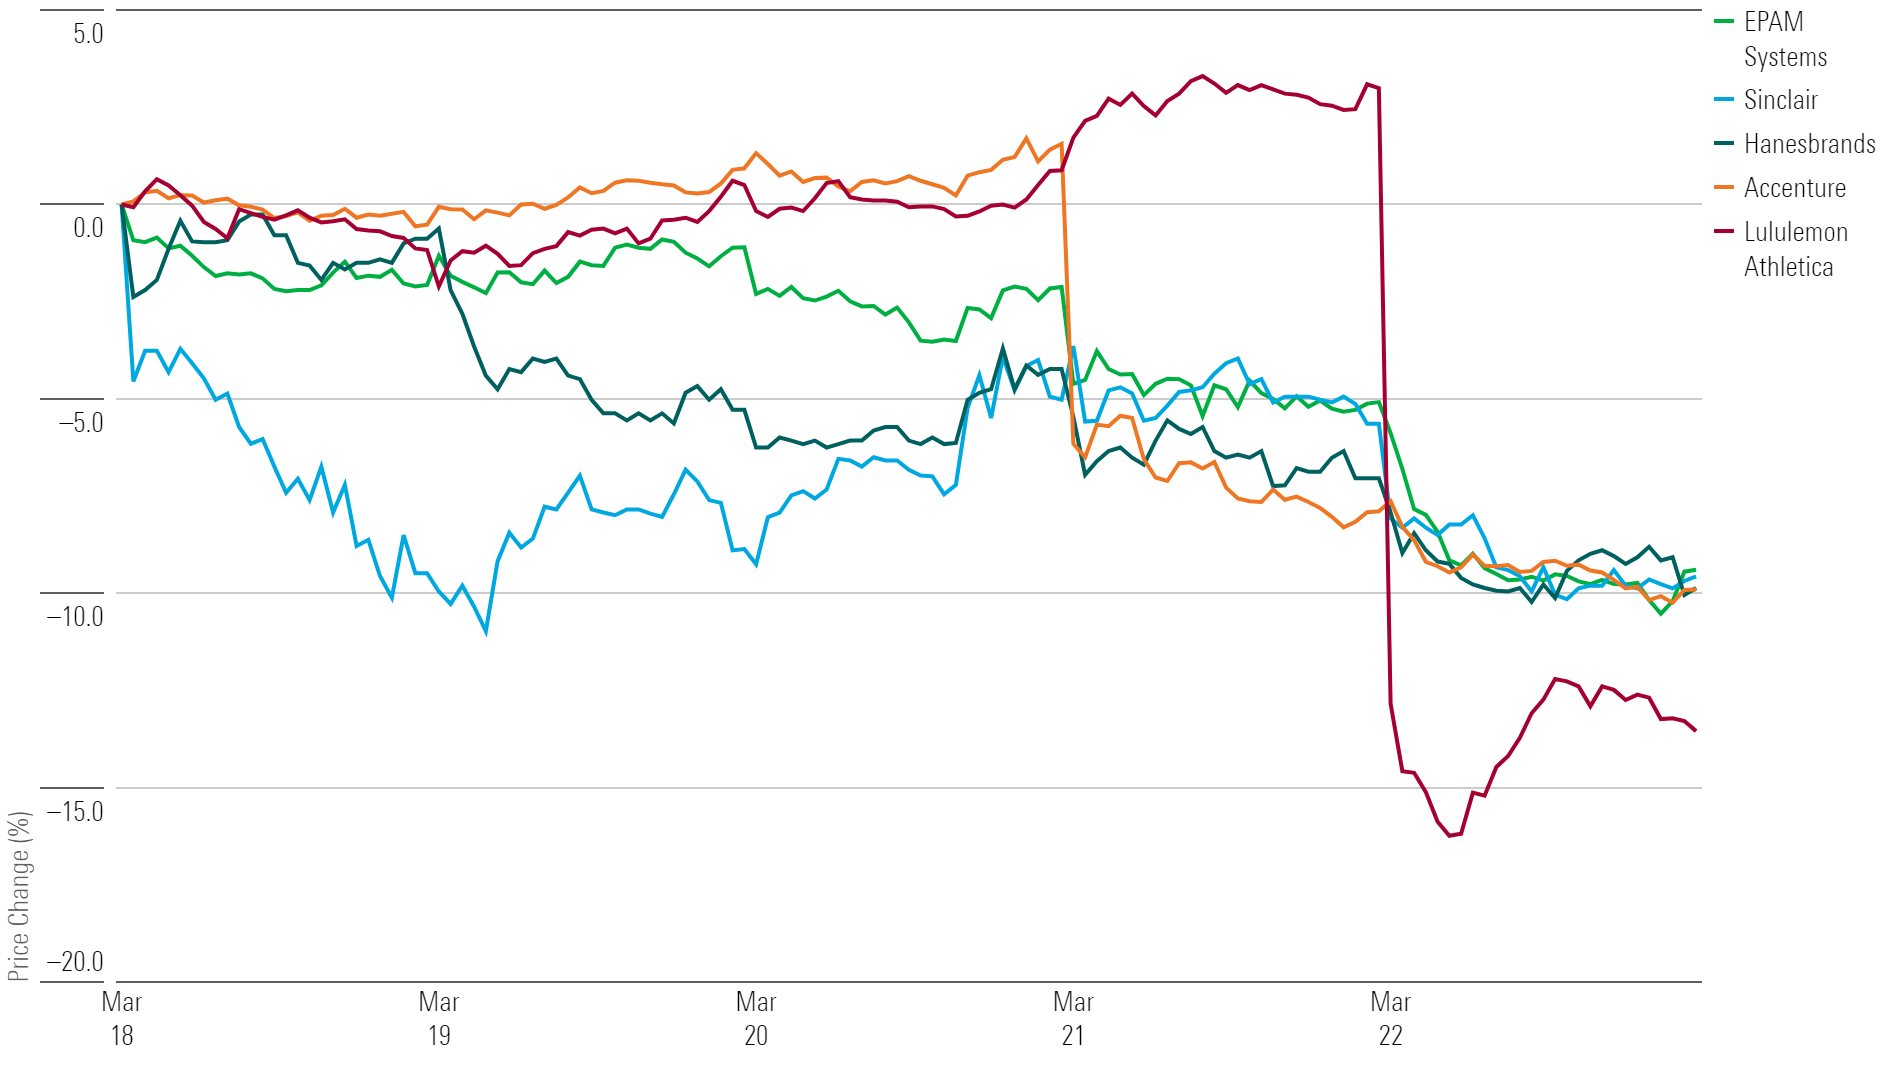 Line chart showing the 5 worst-performing stocks and their 1-week performance.